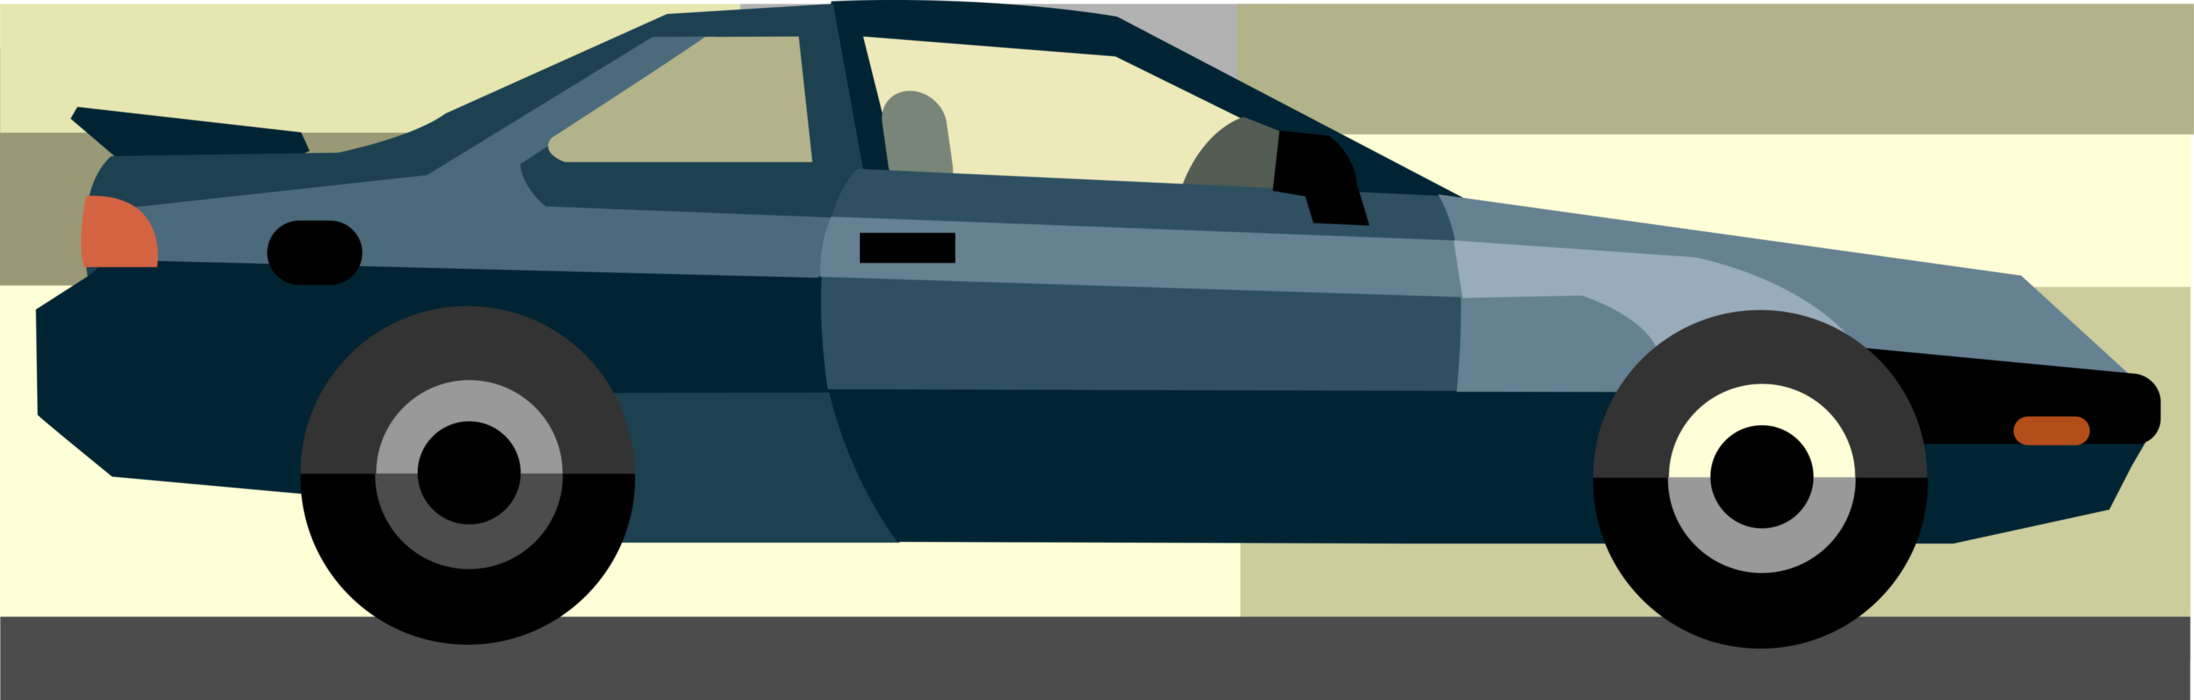 Vector Illustration of Two Door Compact Automobile Motor Vehicle Car